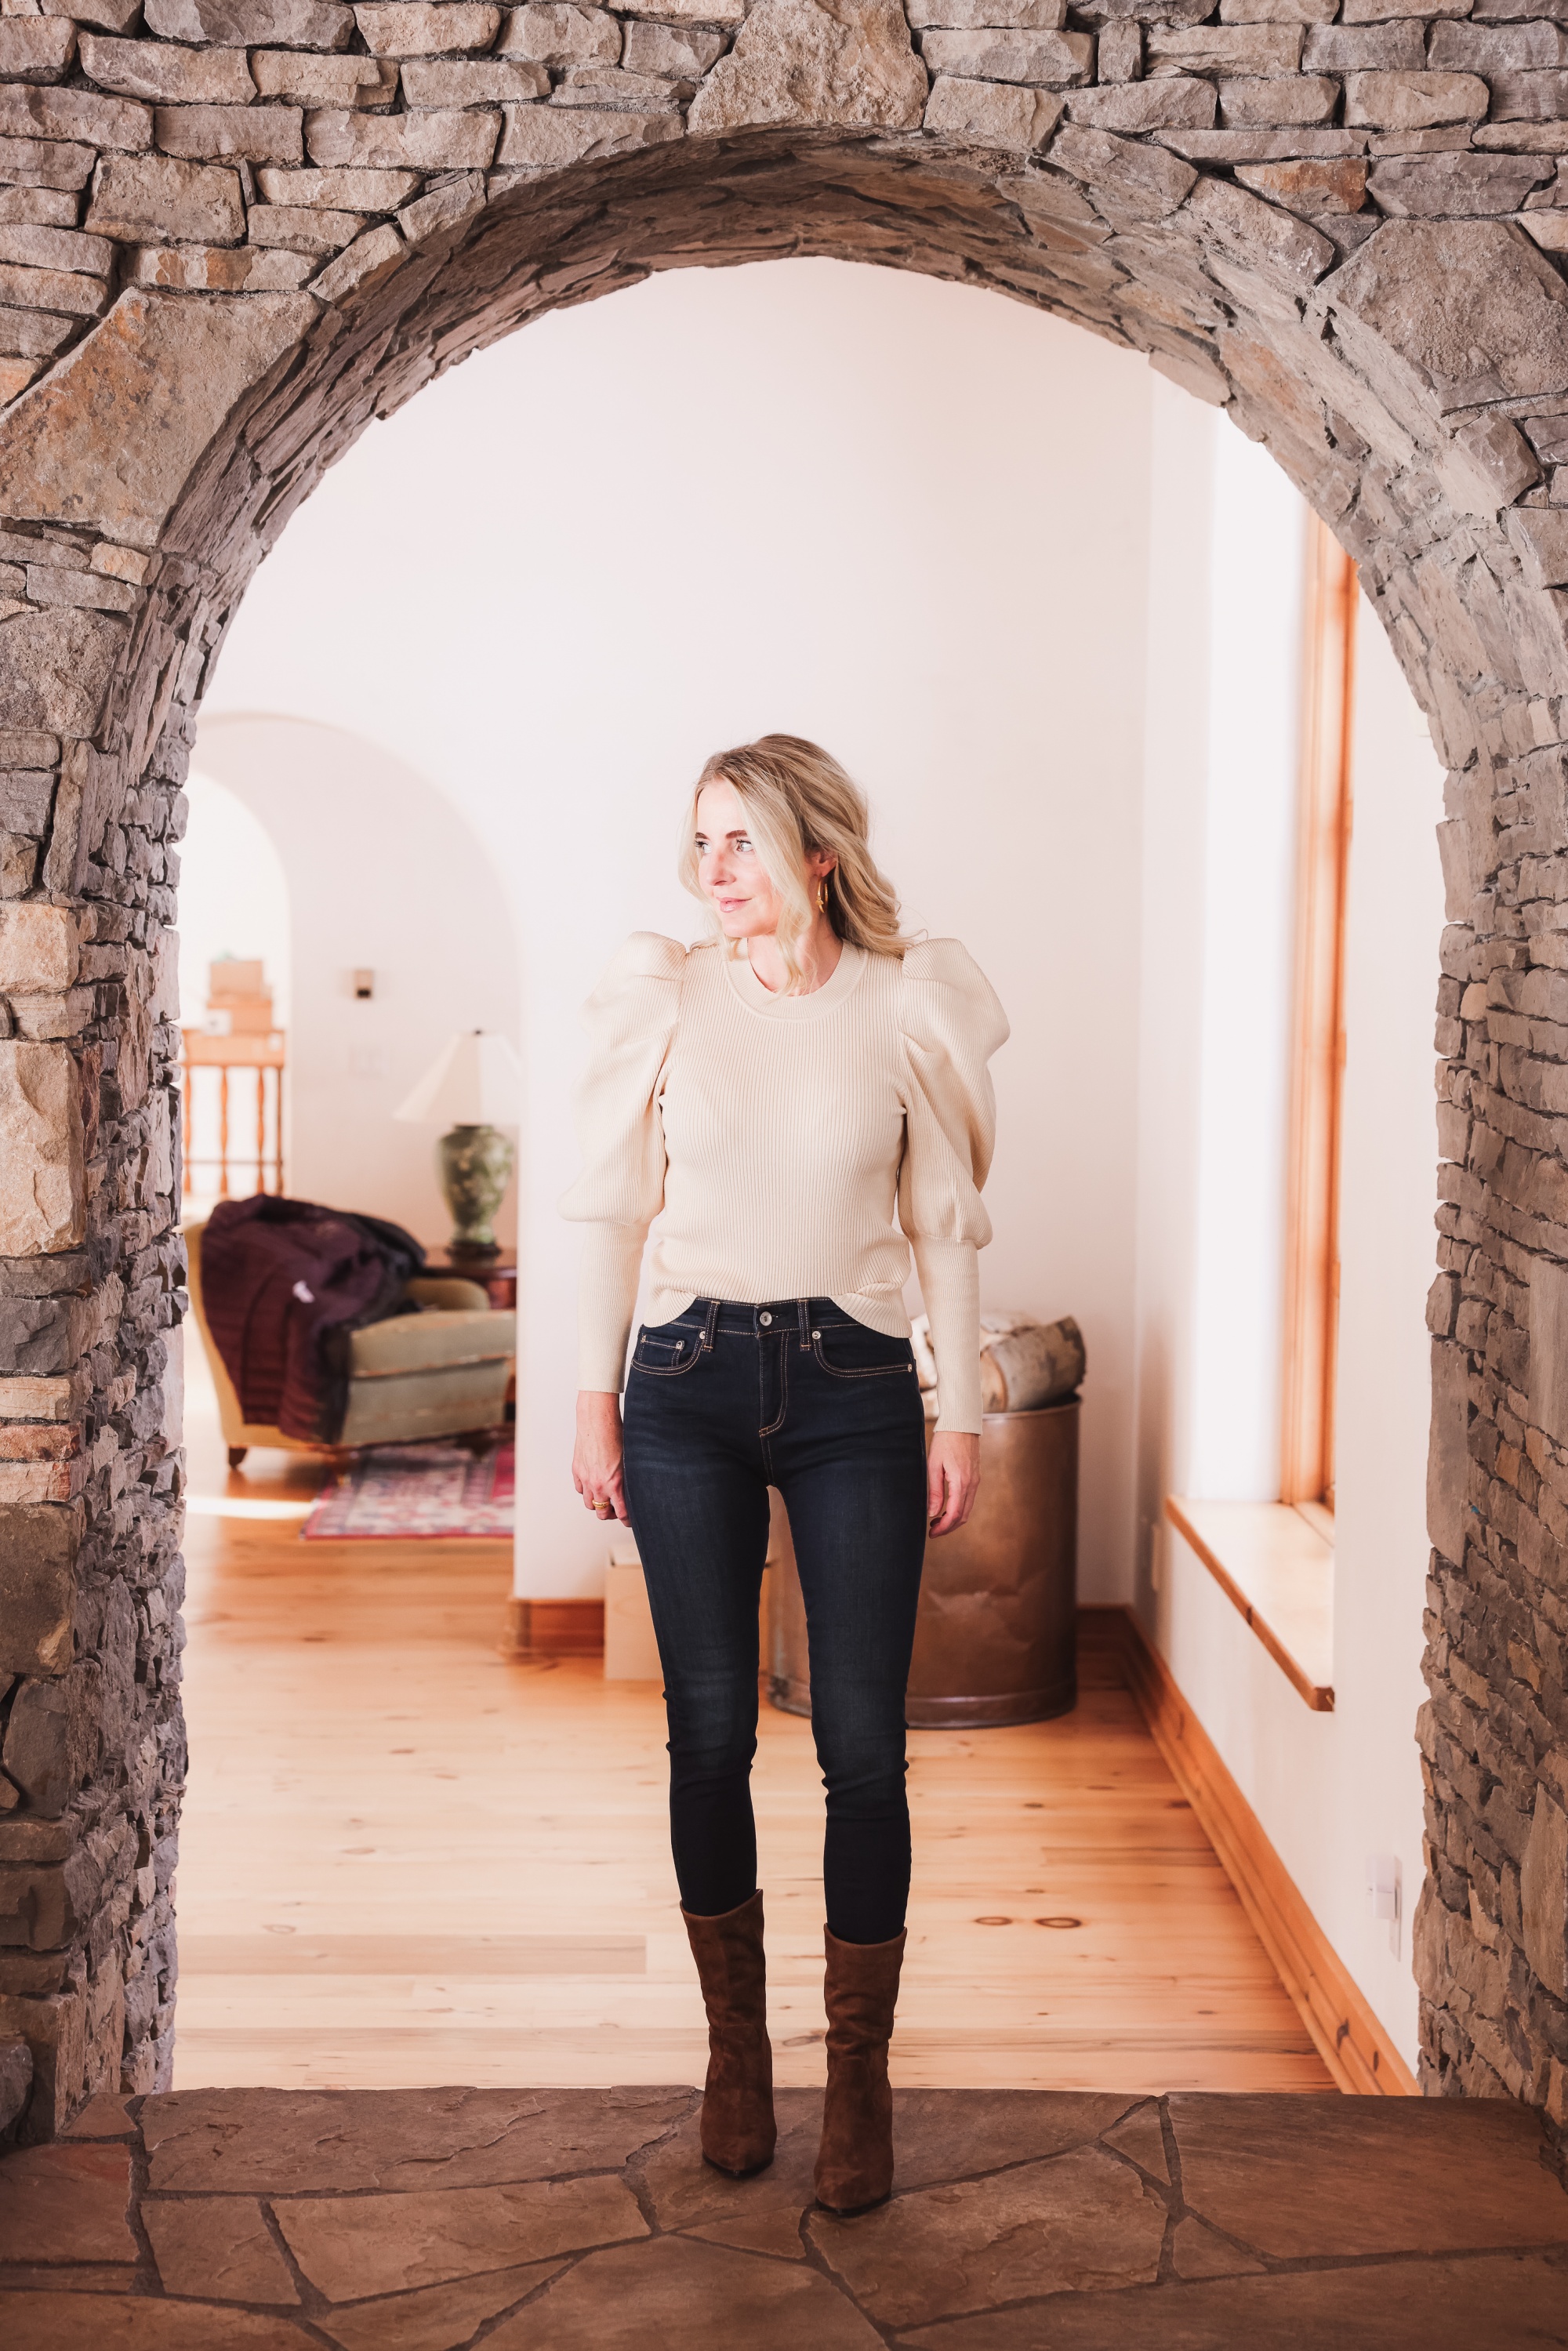 Best brown booties, Erin Busbee of Busbee wearing an ASTR the Label sculptural sleeve sweater with rag & bone skinny jeans and brown western inspired Paige booties from Nordstrom in Telluride, Colorado